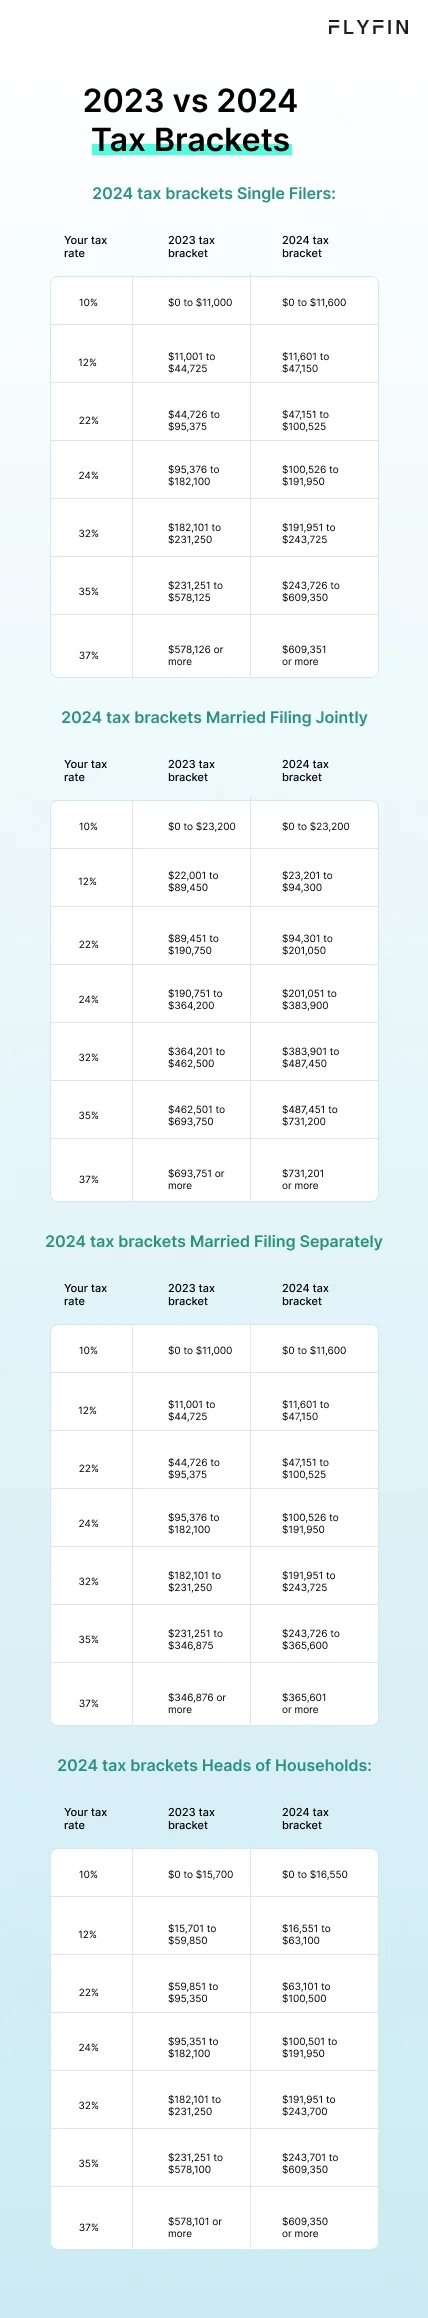 Infographic entitled tax brackets listing the tax brackets and  tax rates for different filing statuses for 2023 vs 2024.